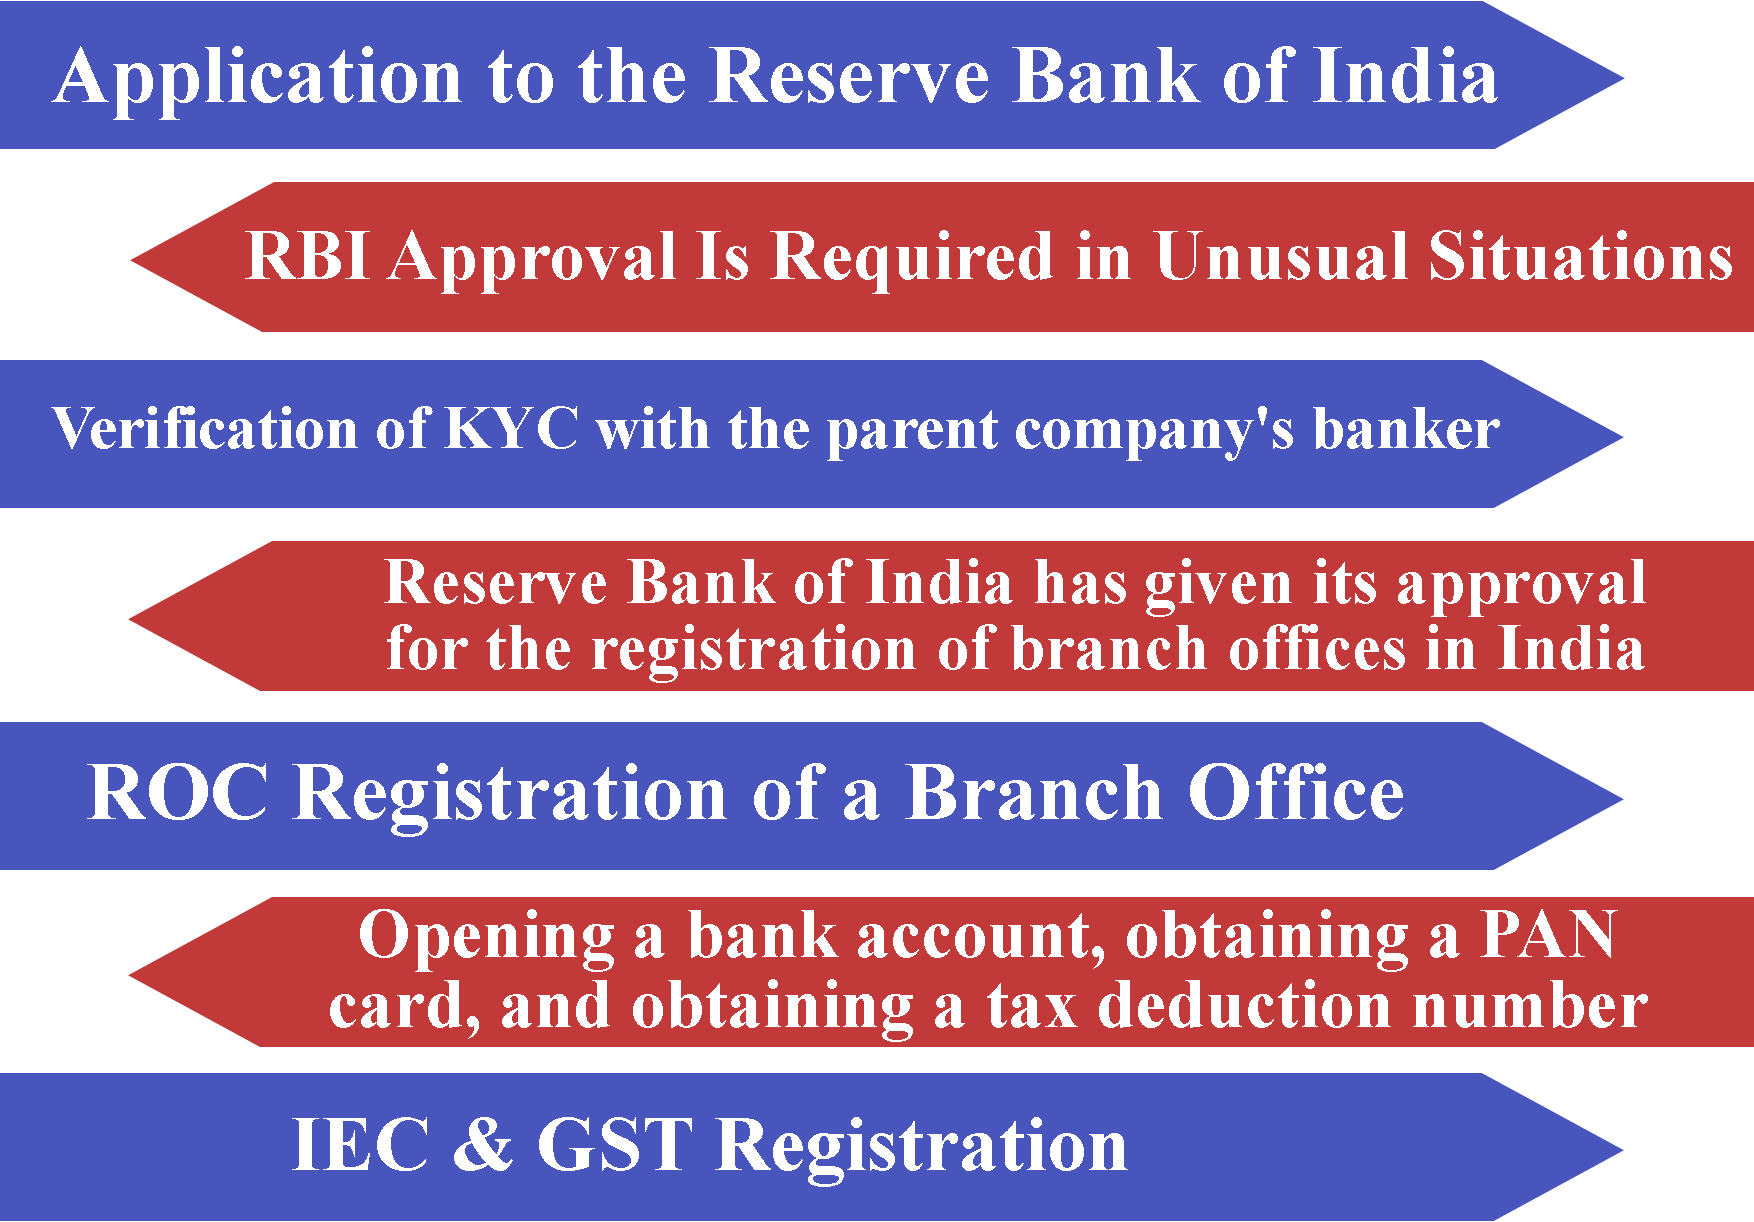 Process for Branch Office Registration